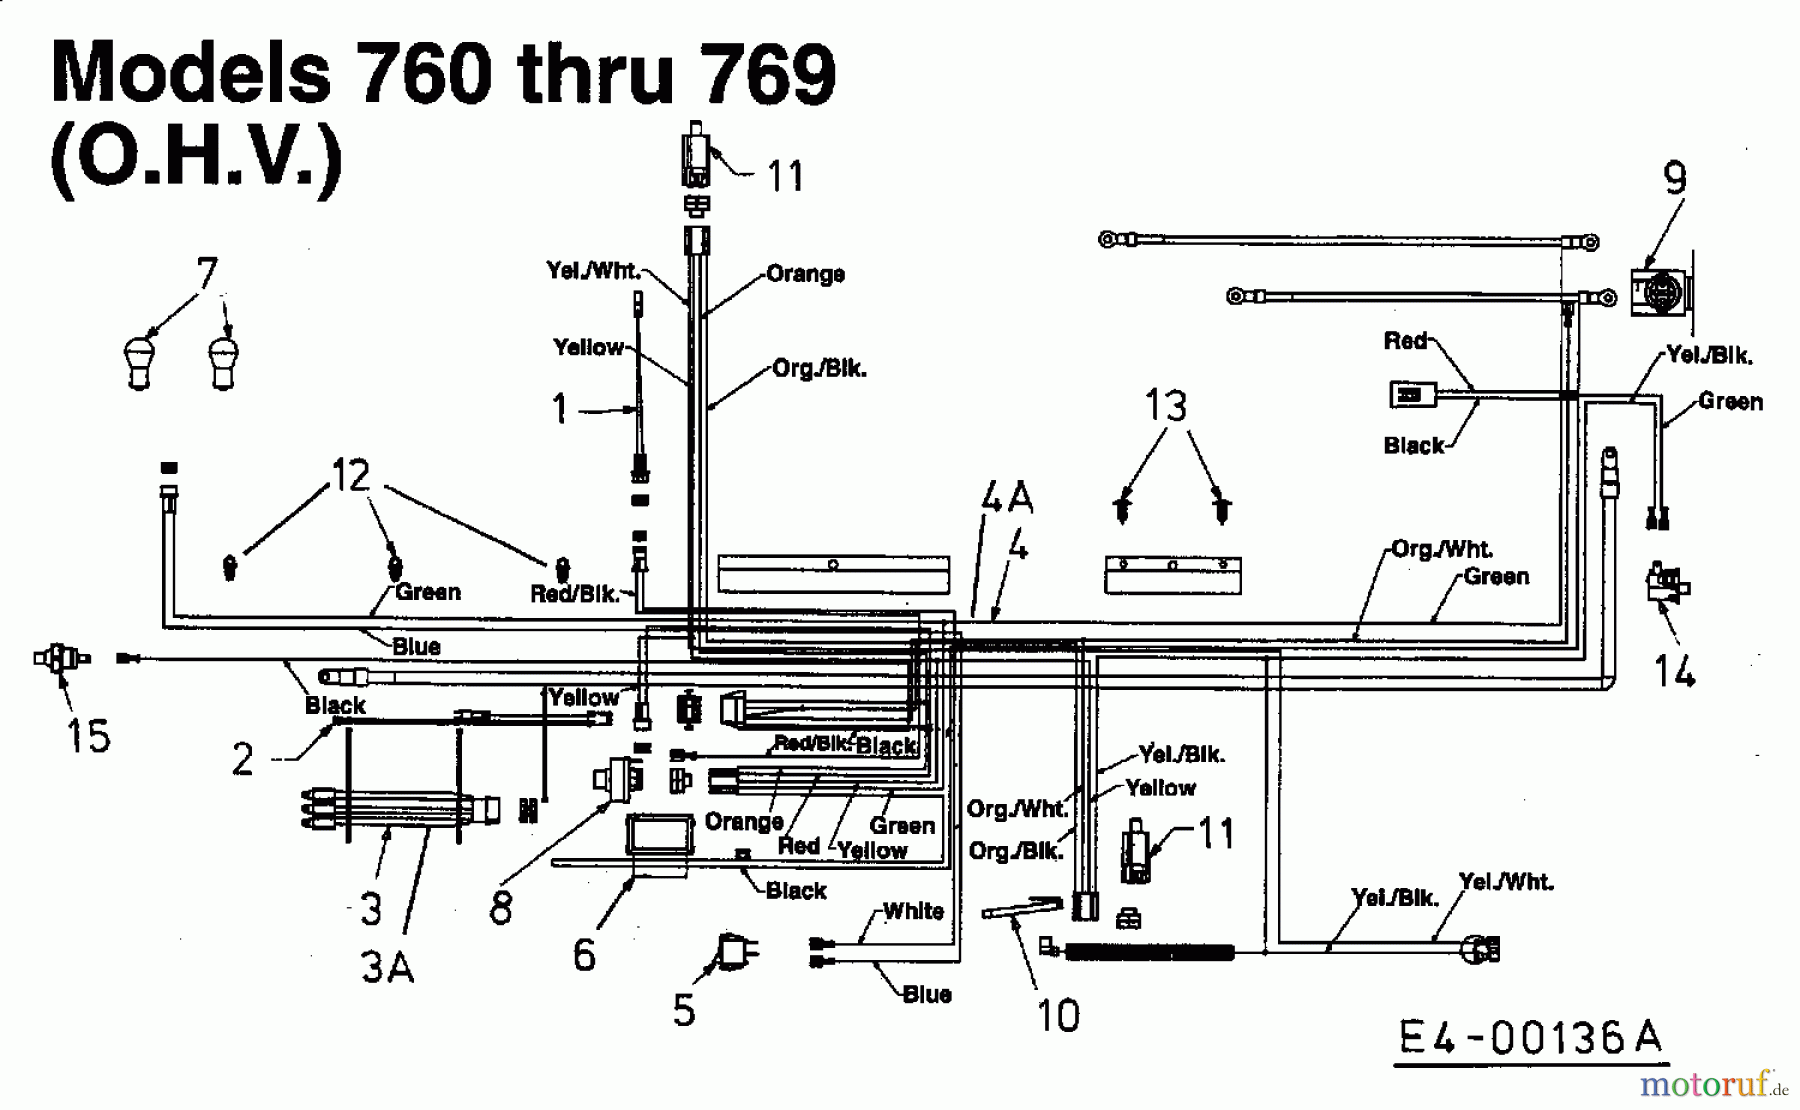  MTD Lawn tractors E 165 13AT765N678  (1997) Wiring diagram for O.H.V.